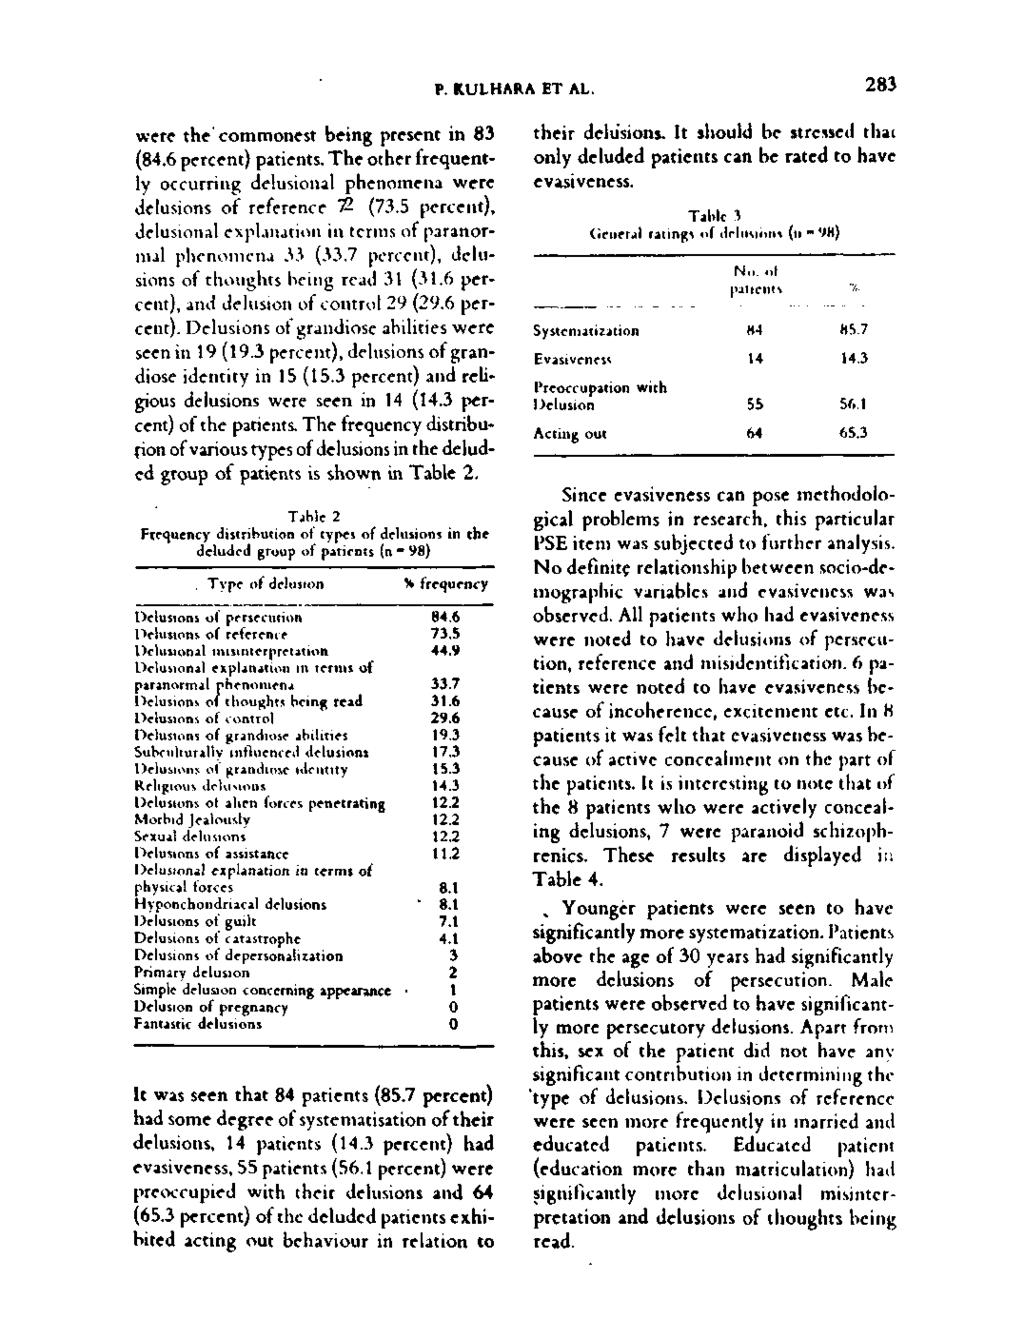 P. KULHARA ET AL. 8 were the commonest being present in 8 (84.6 percent) patients. The other frequently occurring delusional phenomena were delusions of reference 7 (7.